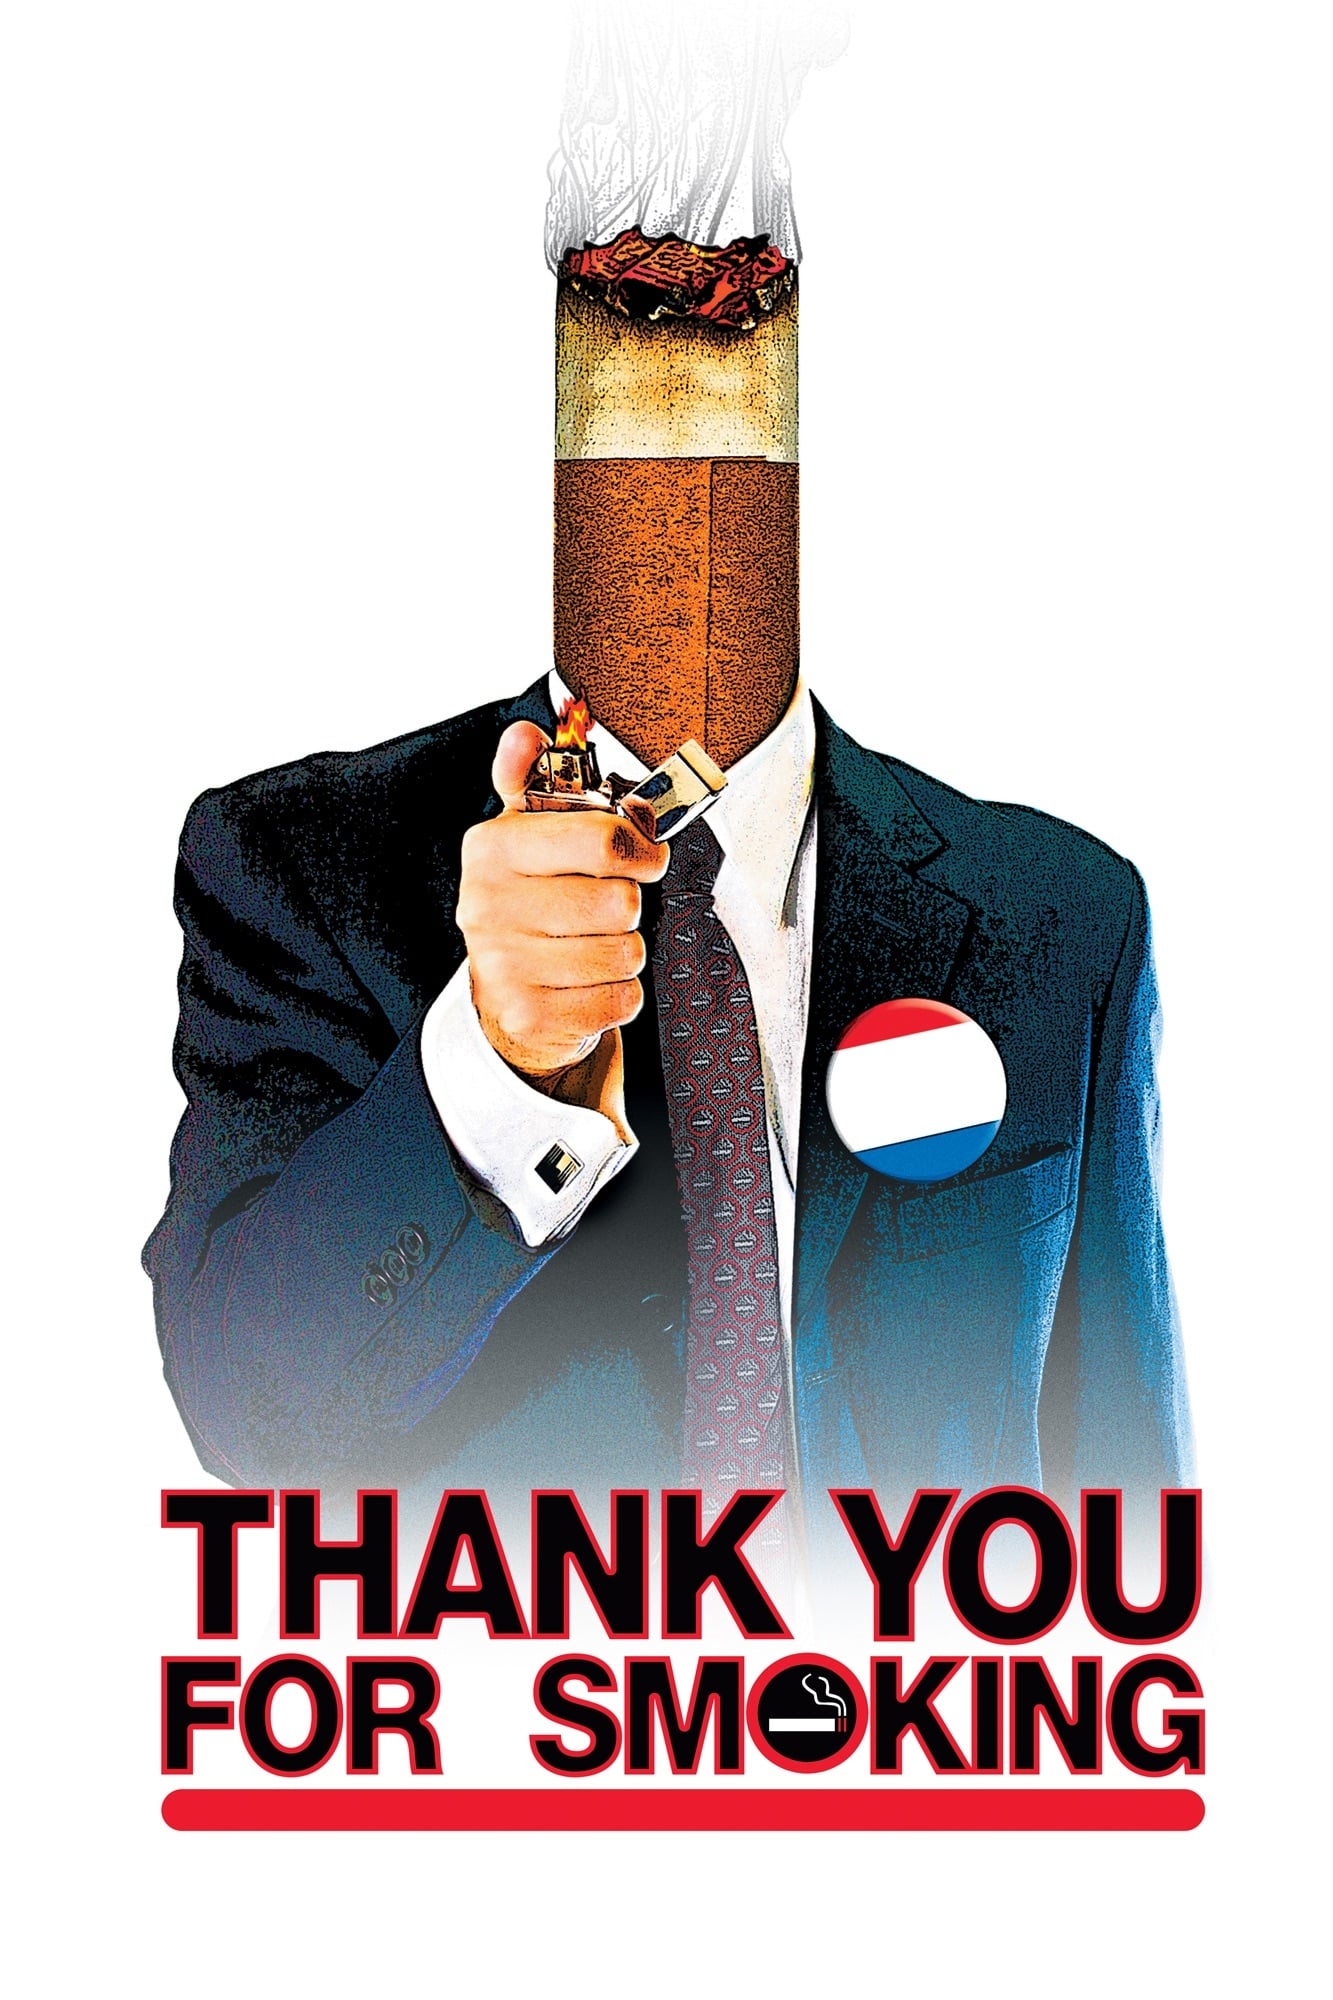 Thank You for Smoking (2006)